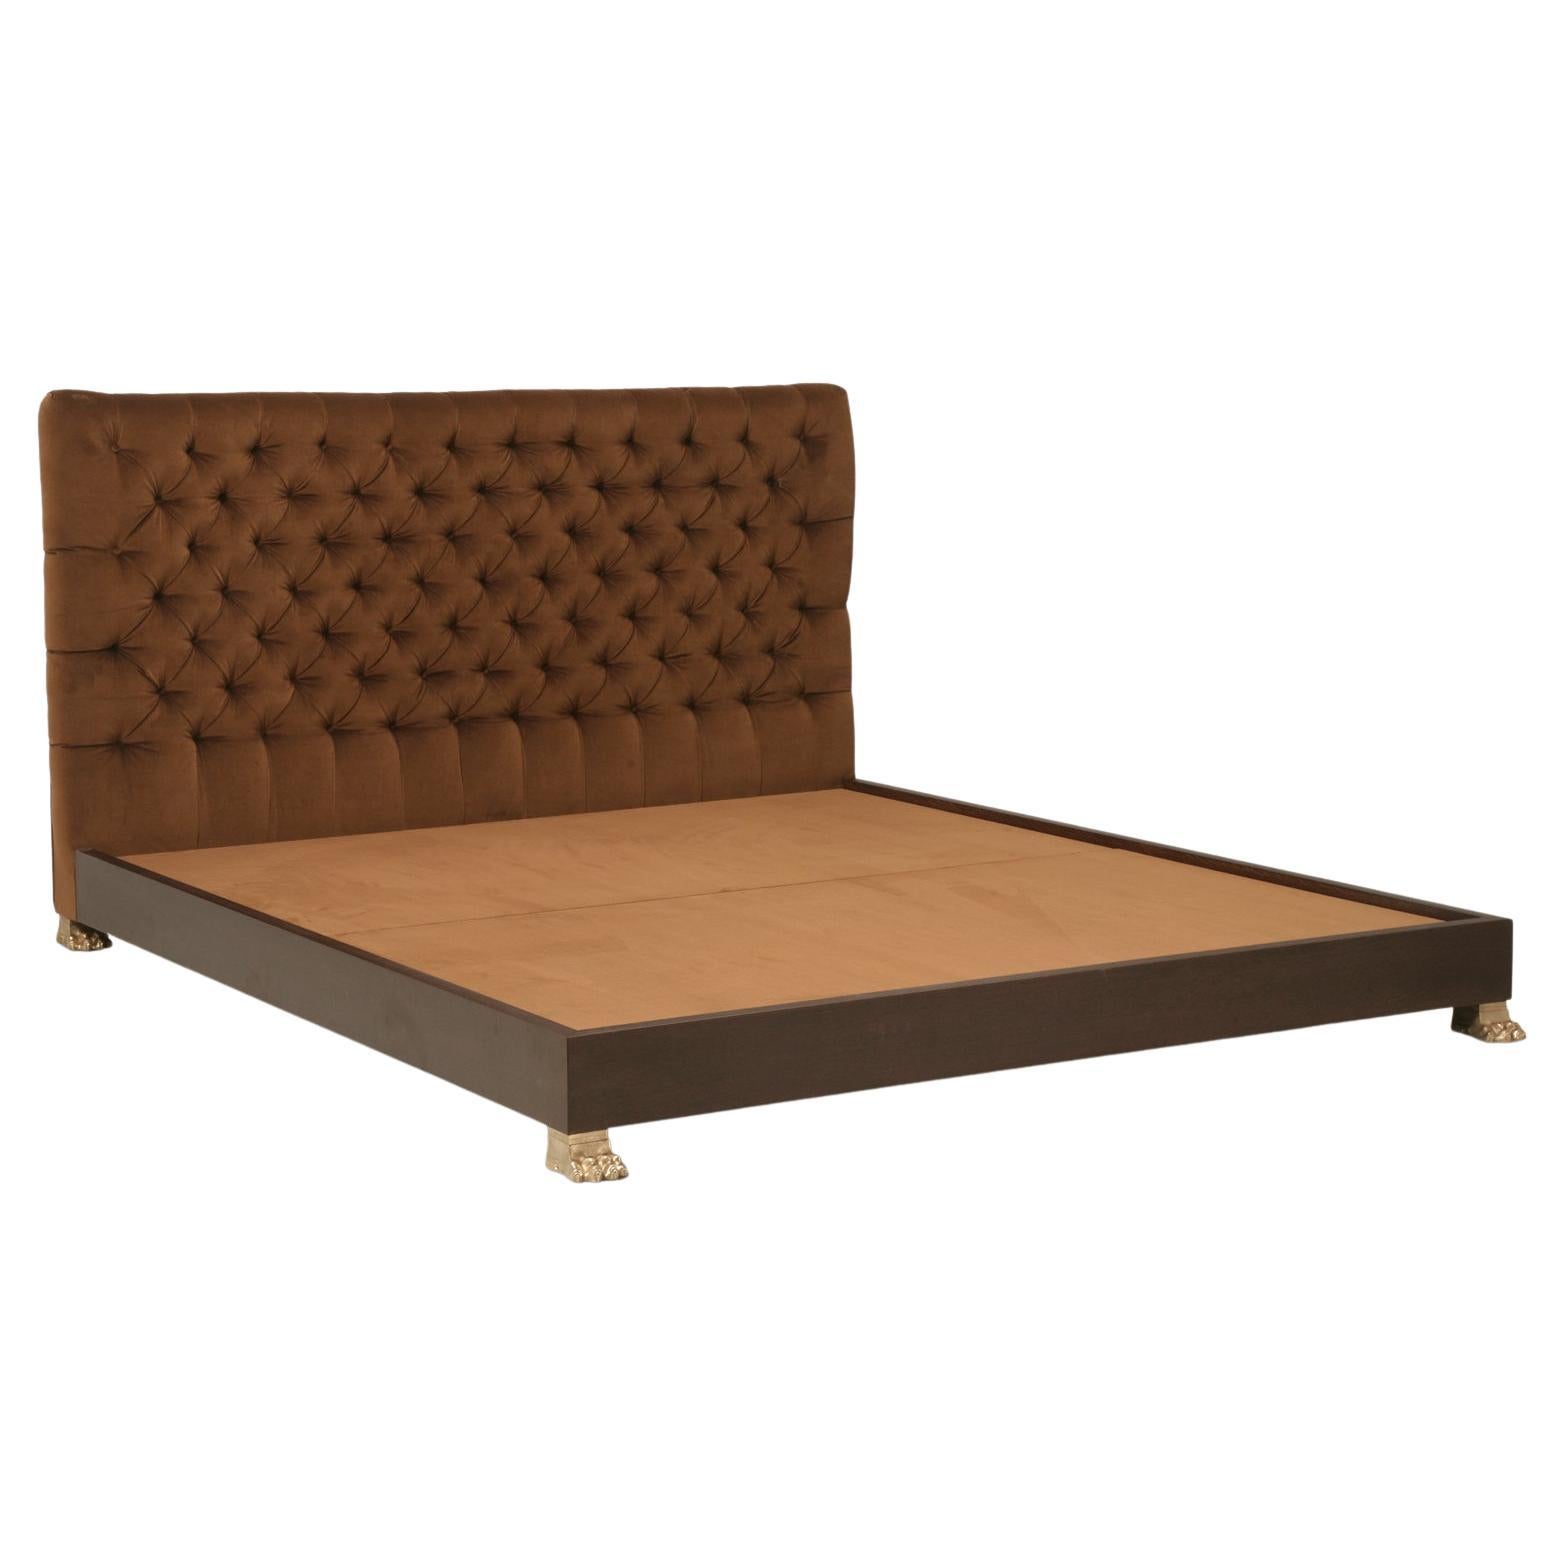 California King Size Bed Exposed Frame Bronze Lion Paw Feet All Sizes Available For Sale